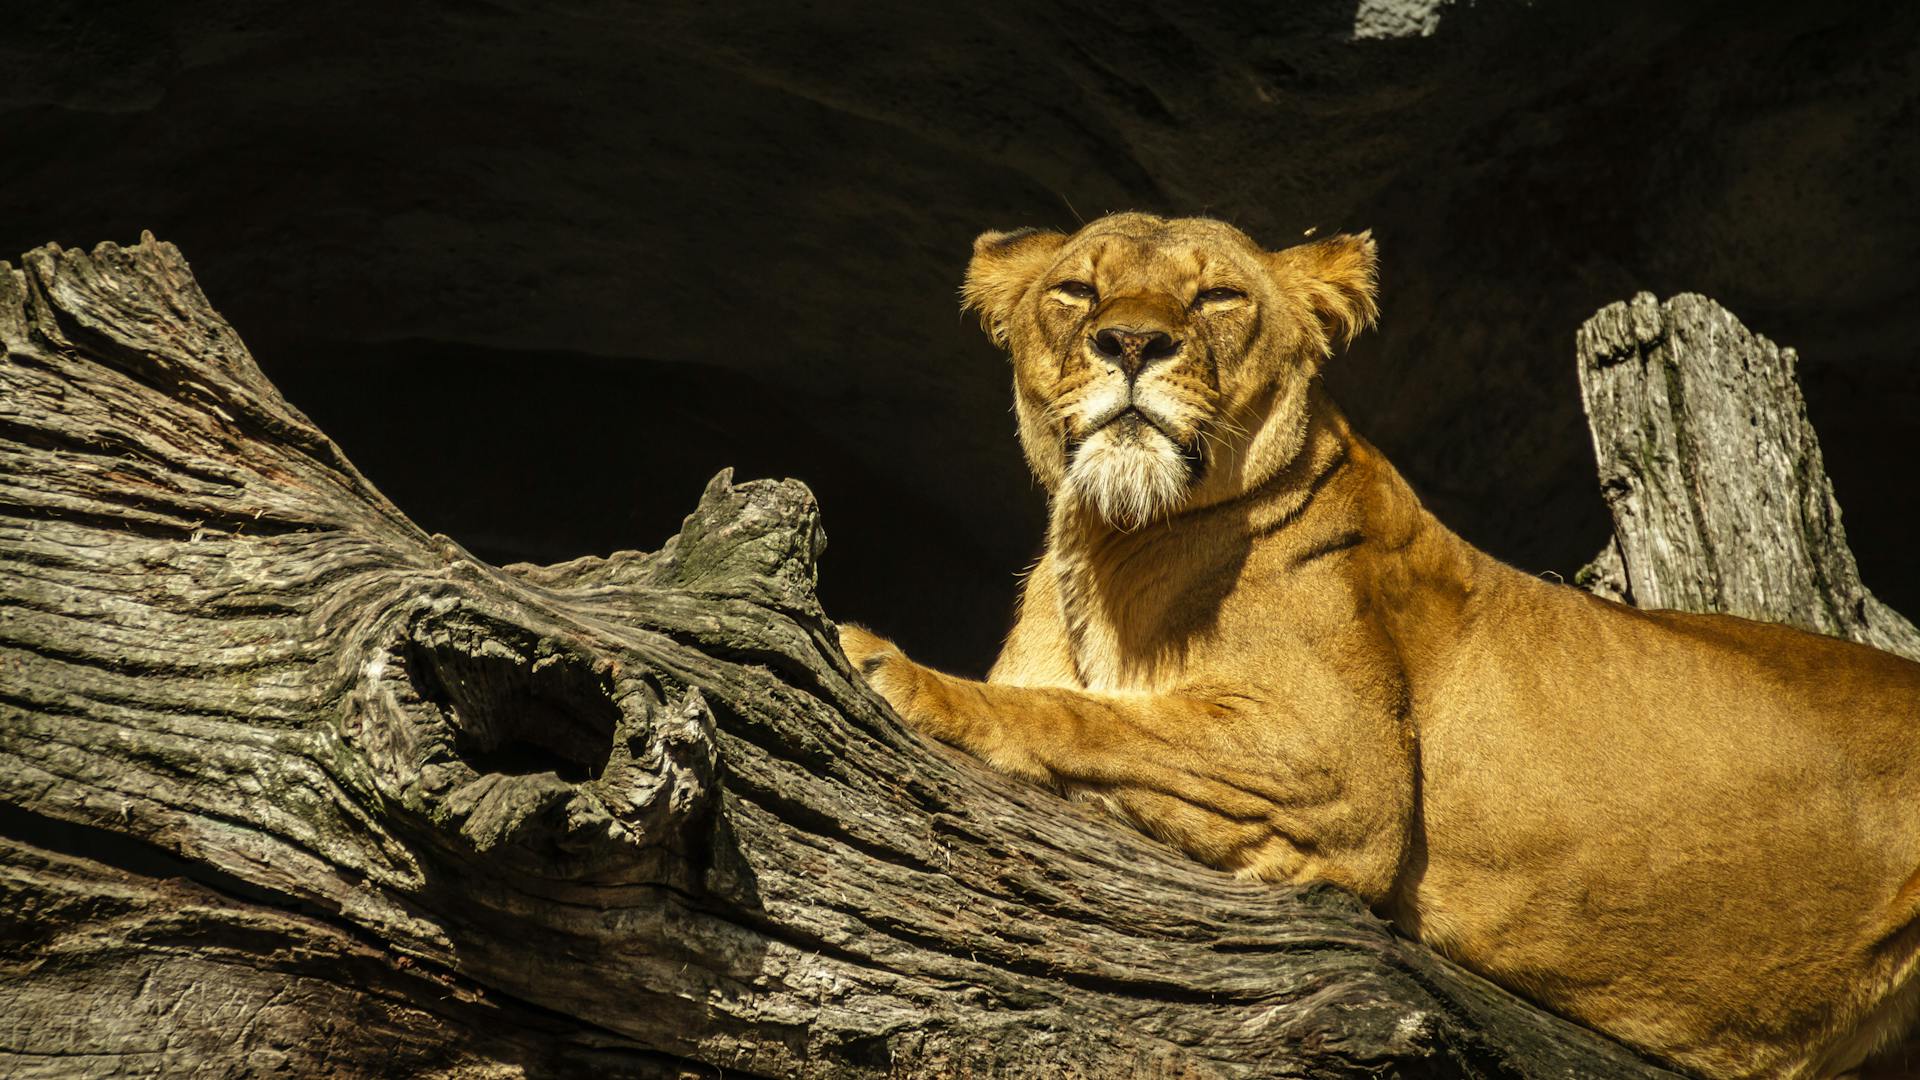 Lioness on Driftwood